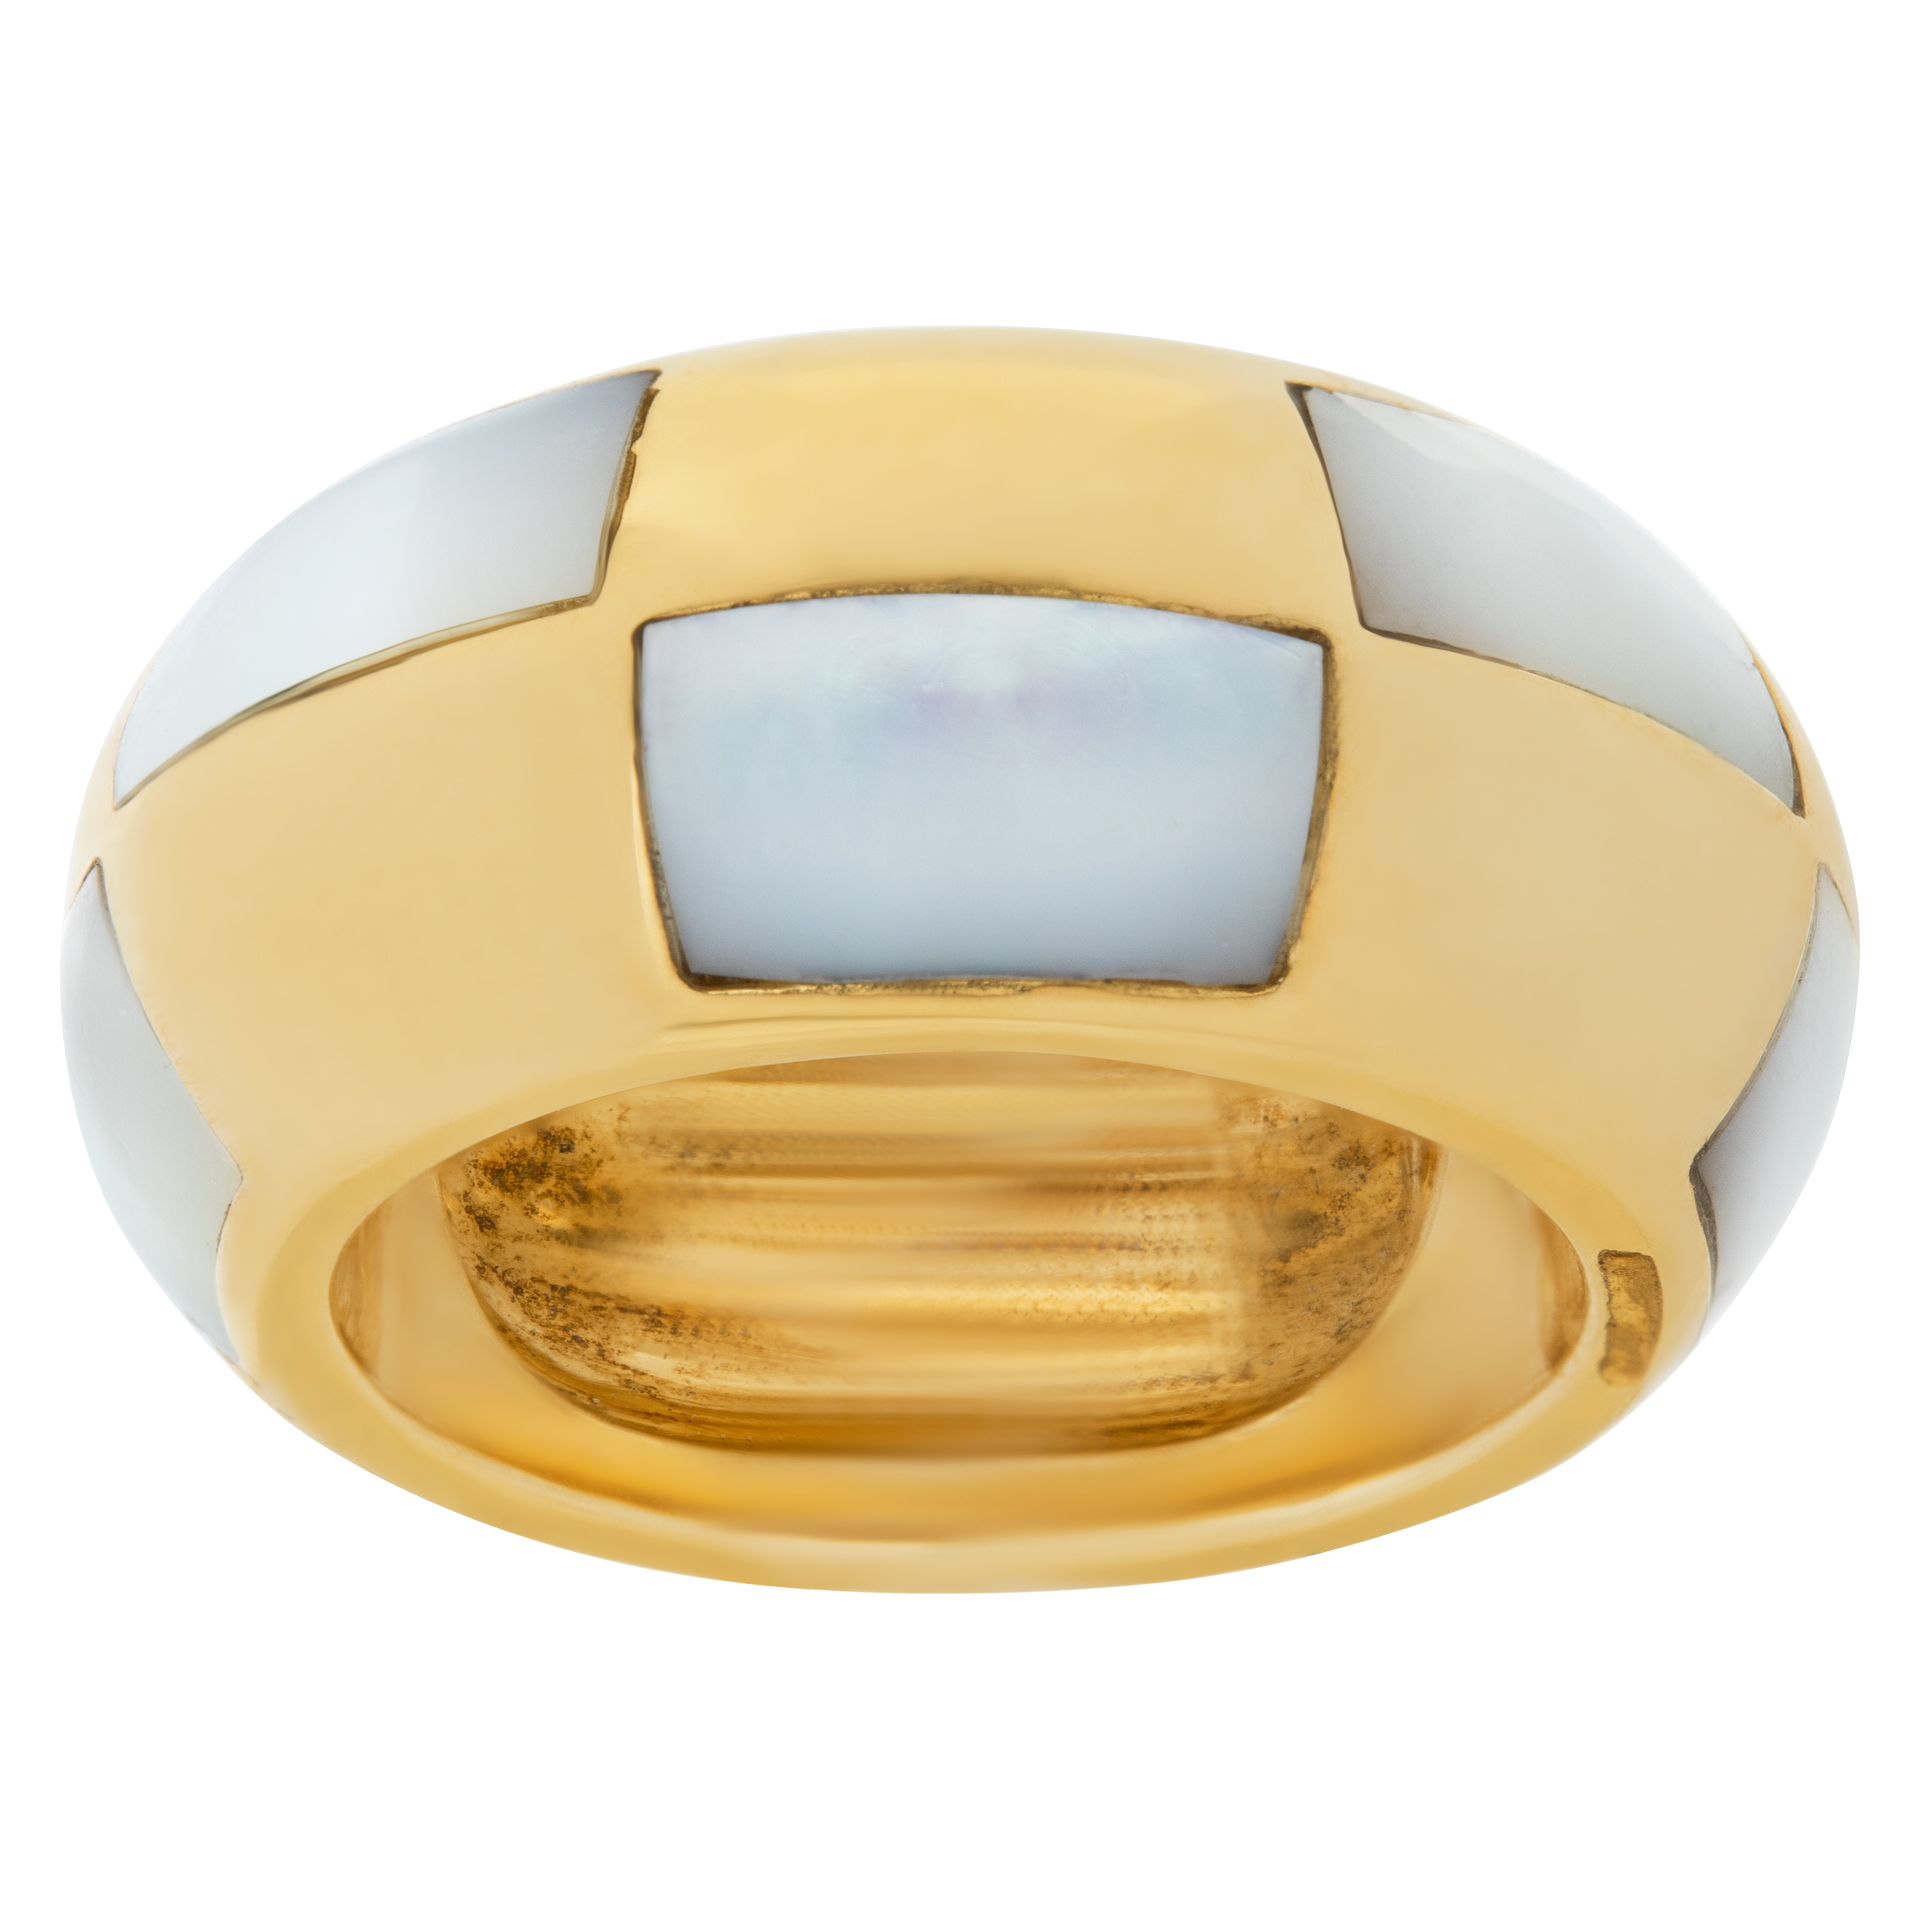 Mauboussin ring in 18k yellow gold with inlaid mother of pearl accents image 1